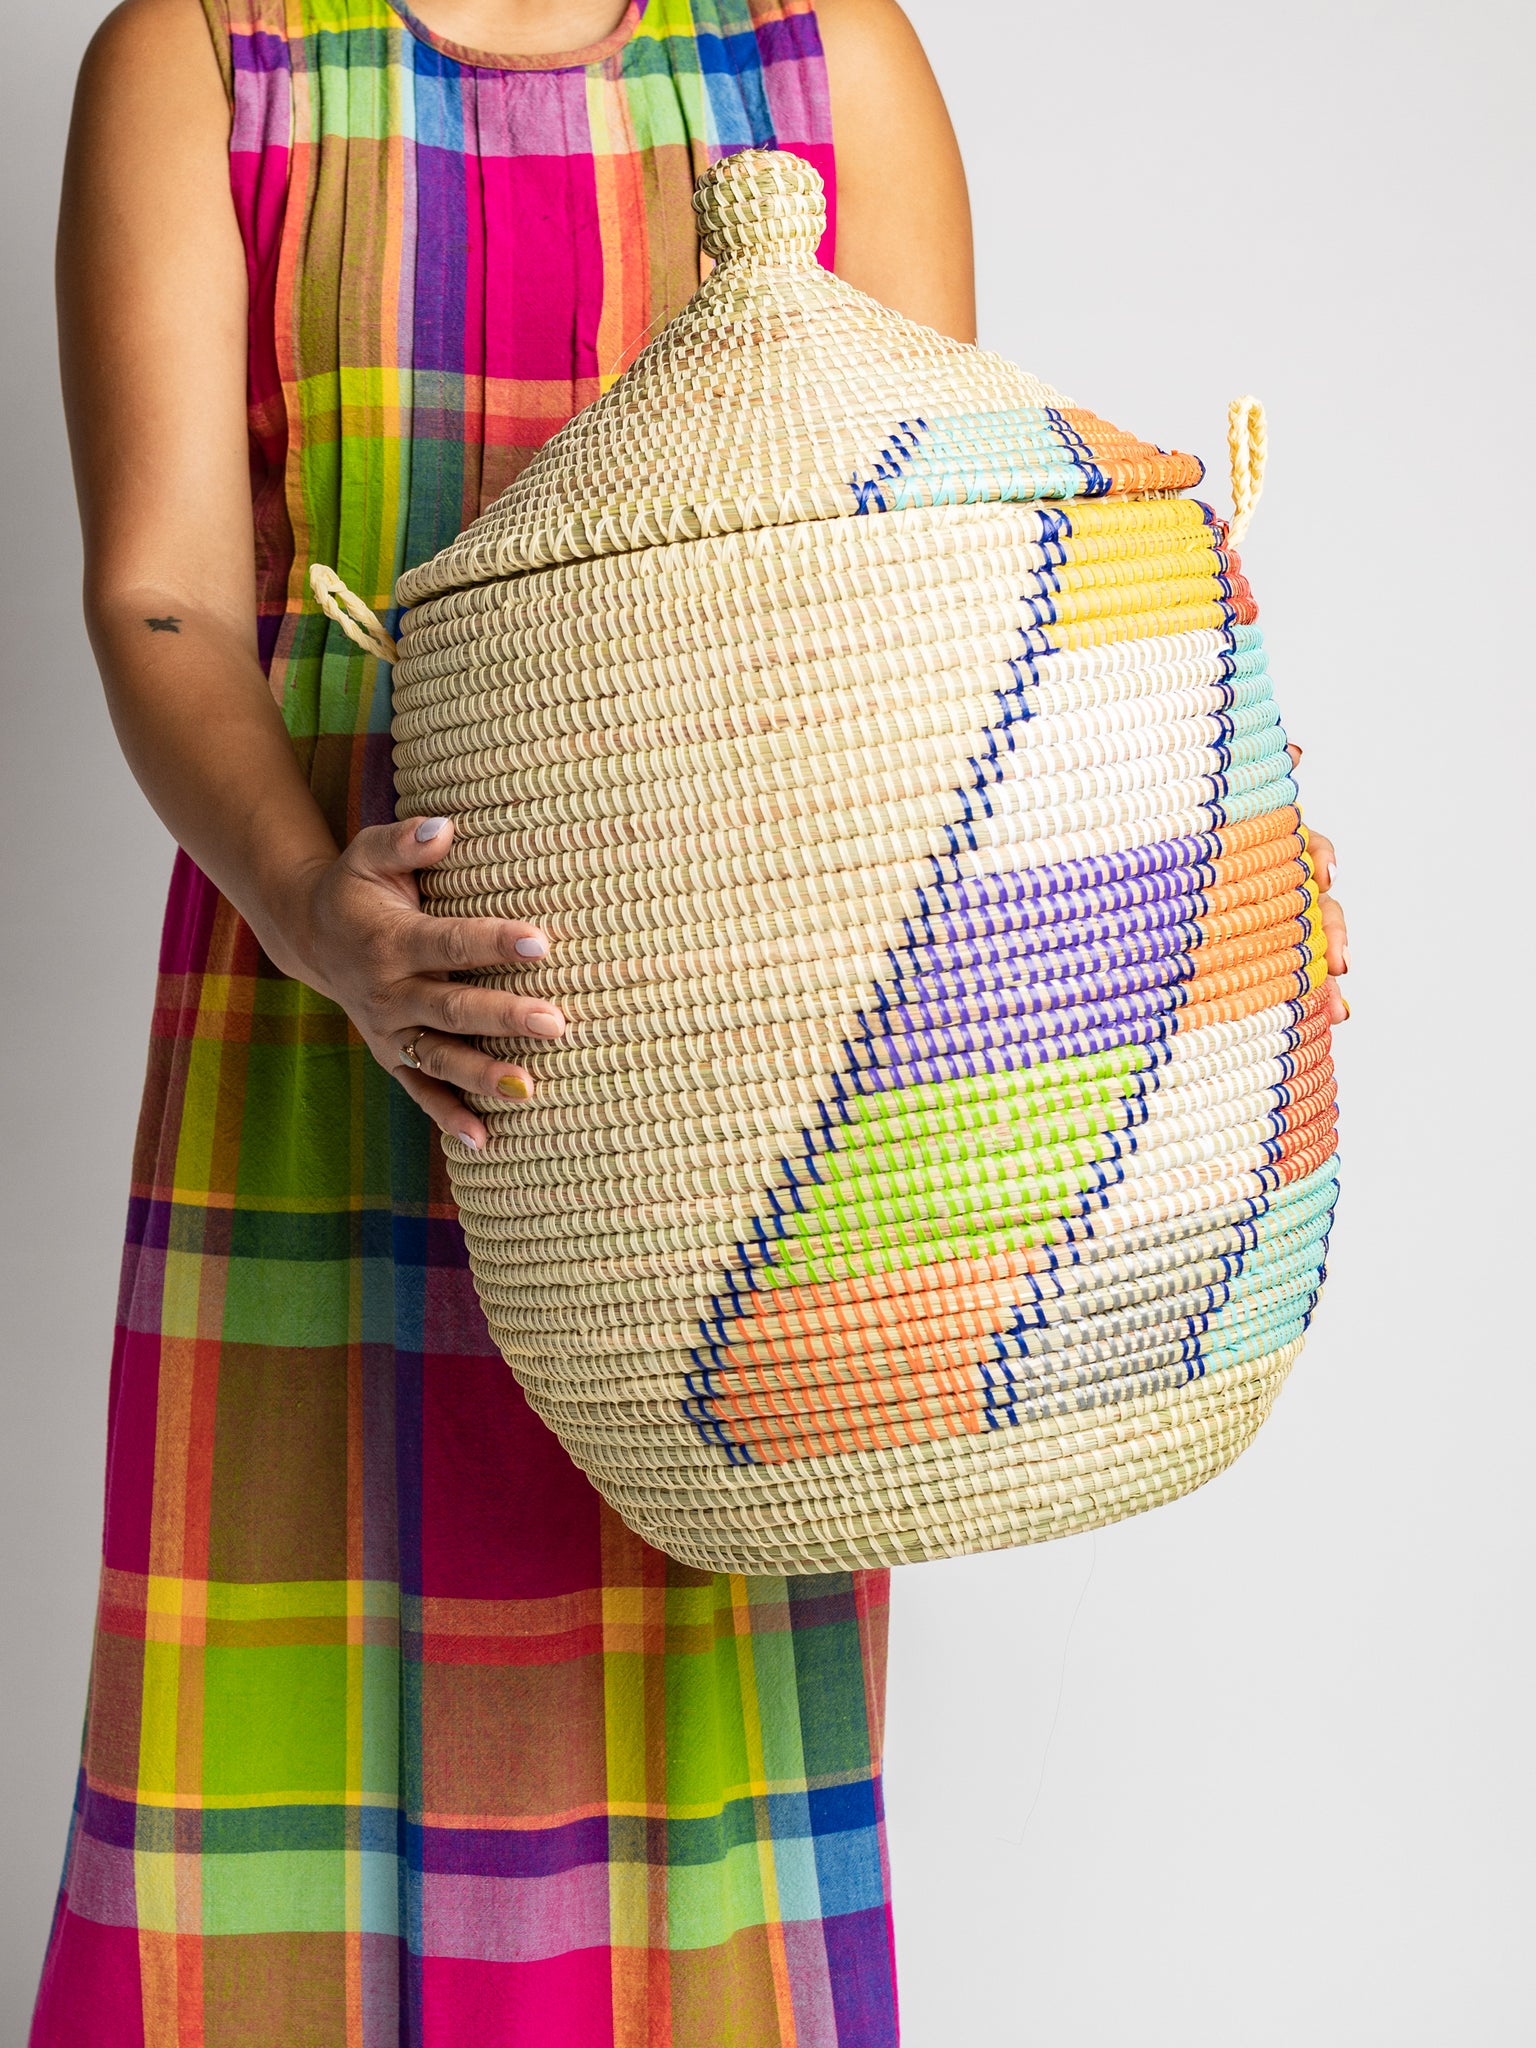 Basket - handwoven in West Africa with stripes, perfect for storage